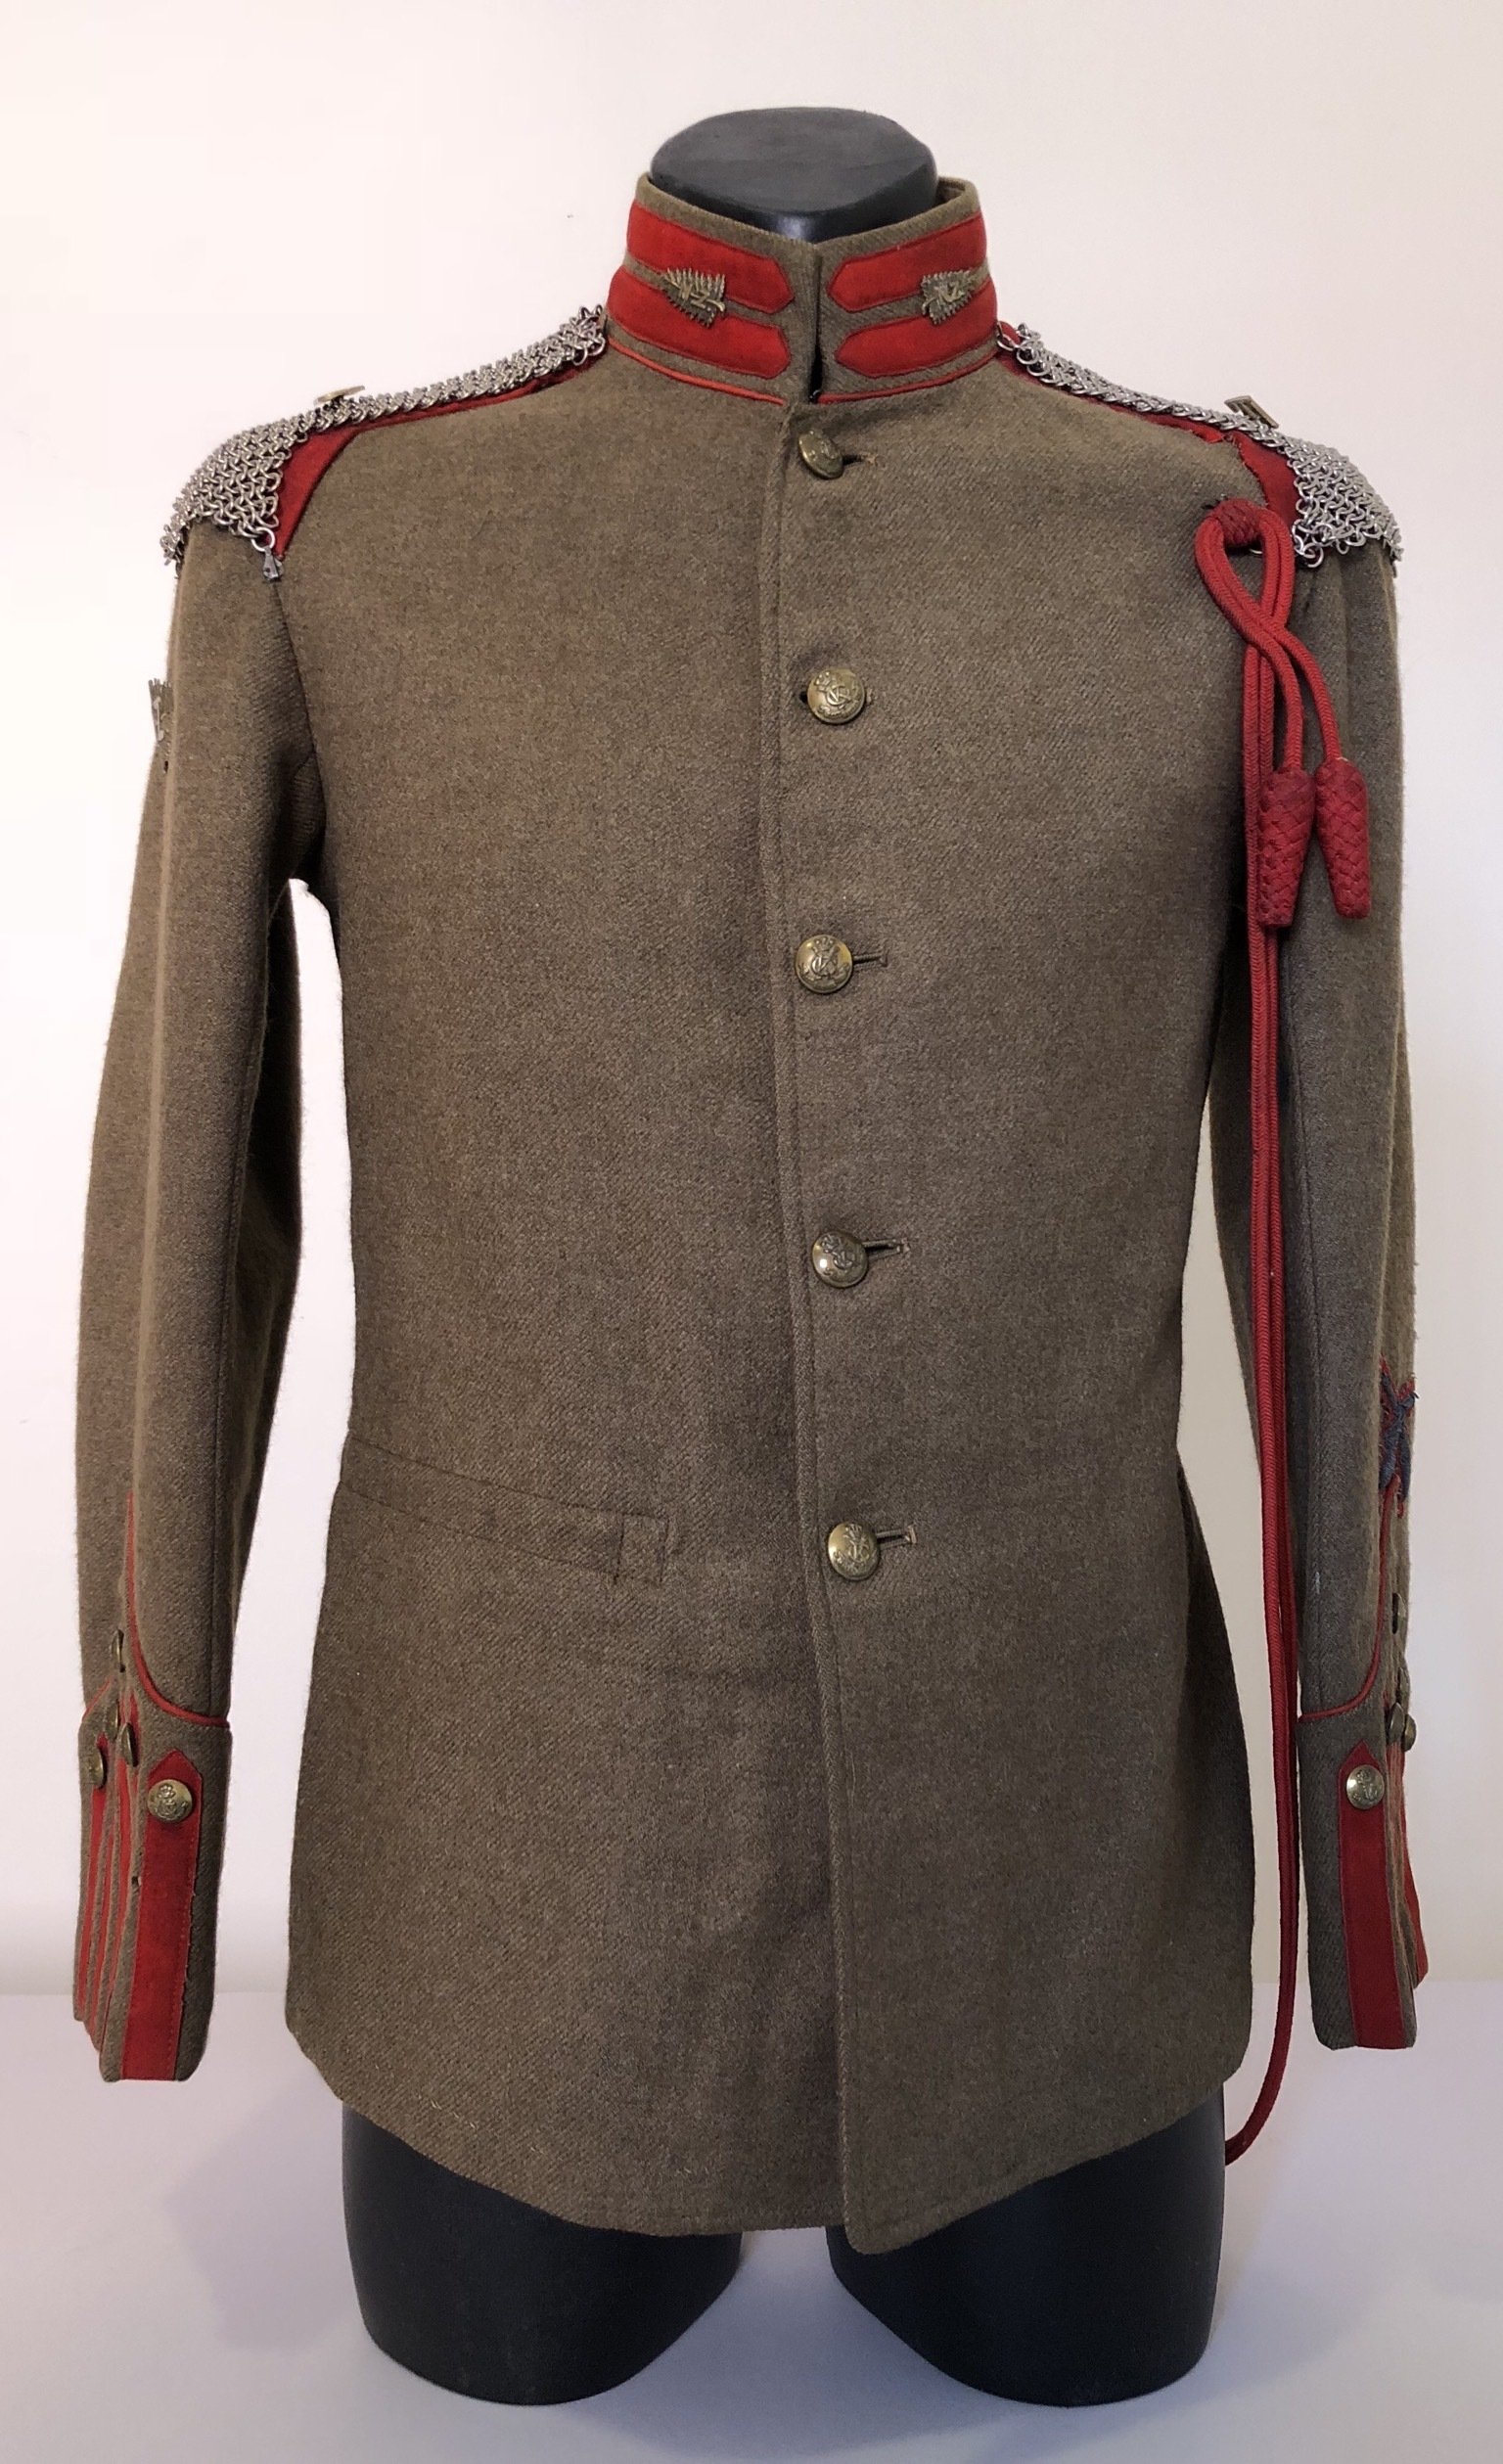 Full Dress tunic worn by Squadron Quarter Master Sergeant MacIntosh of the 3rd New Zealand troop of ‘D’ Squadron (South African), 4th County of London (King’s Colonial’s) Imperial Yeomanry, circa 1905-06. The tunic was made by Hobson and Sons, London and bears the name MacIntosh on the inside rear of the collar.